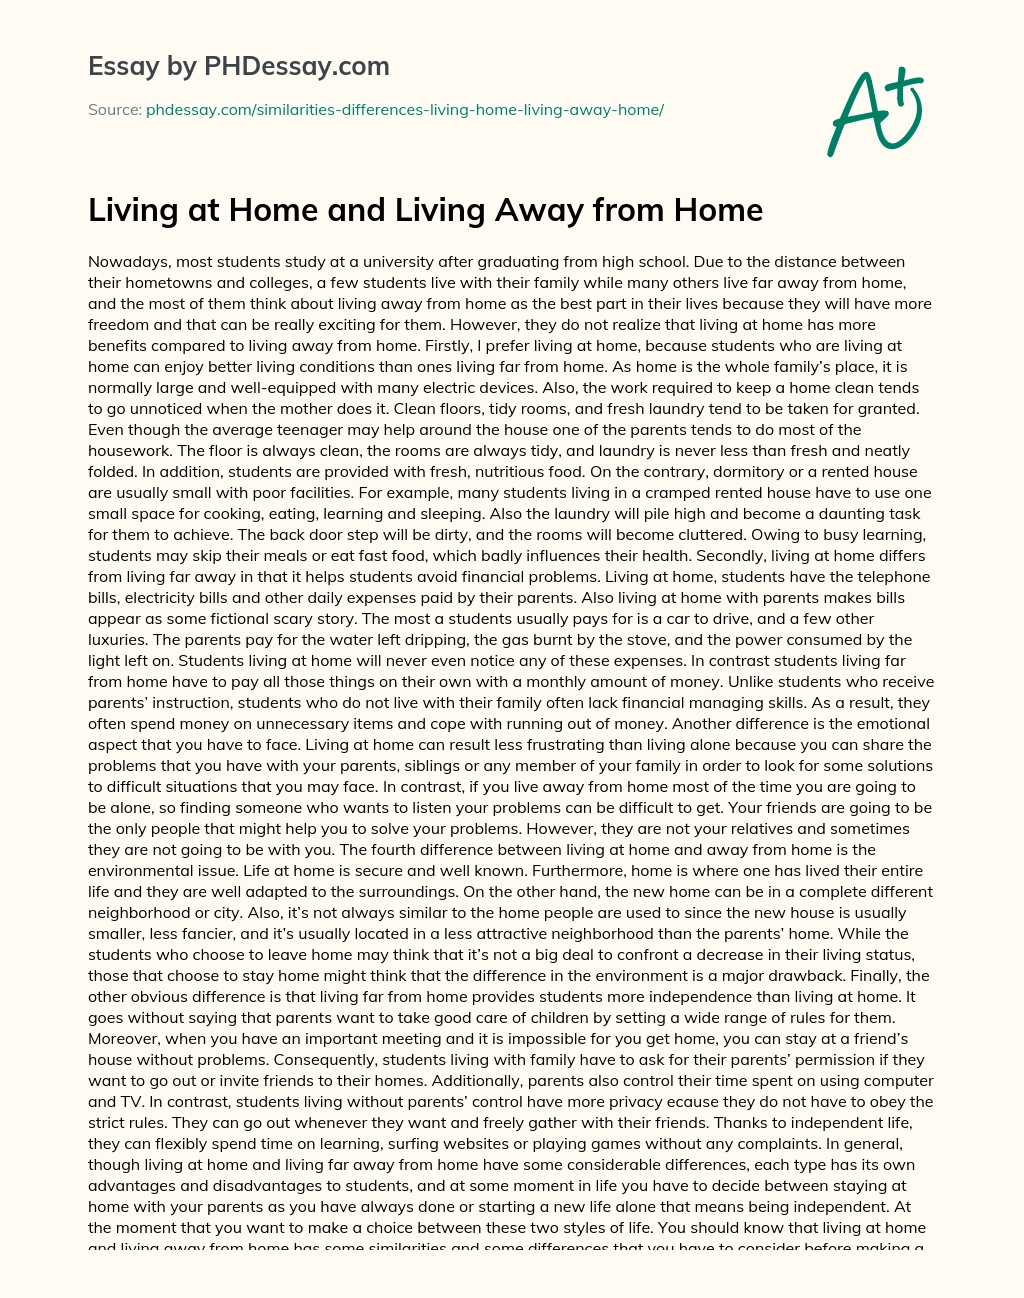 Living at Home and Living Away from Home essay